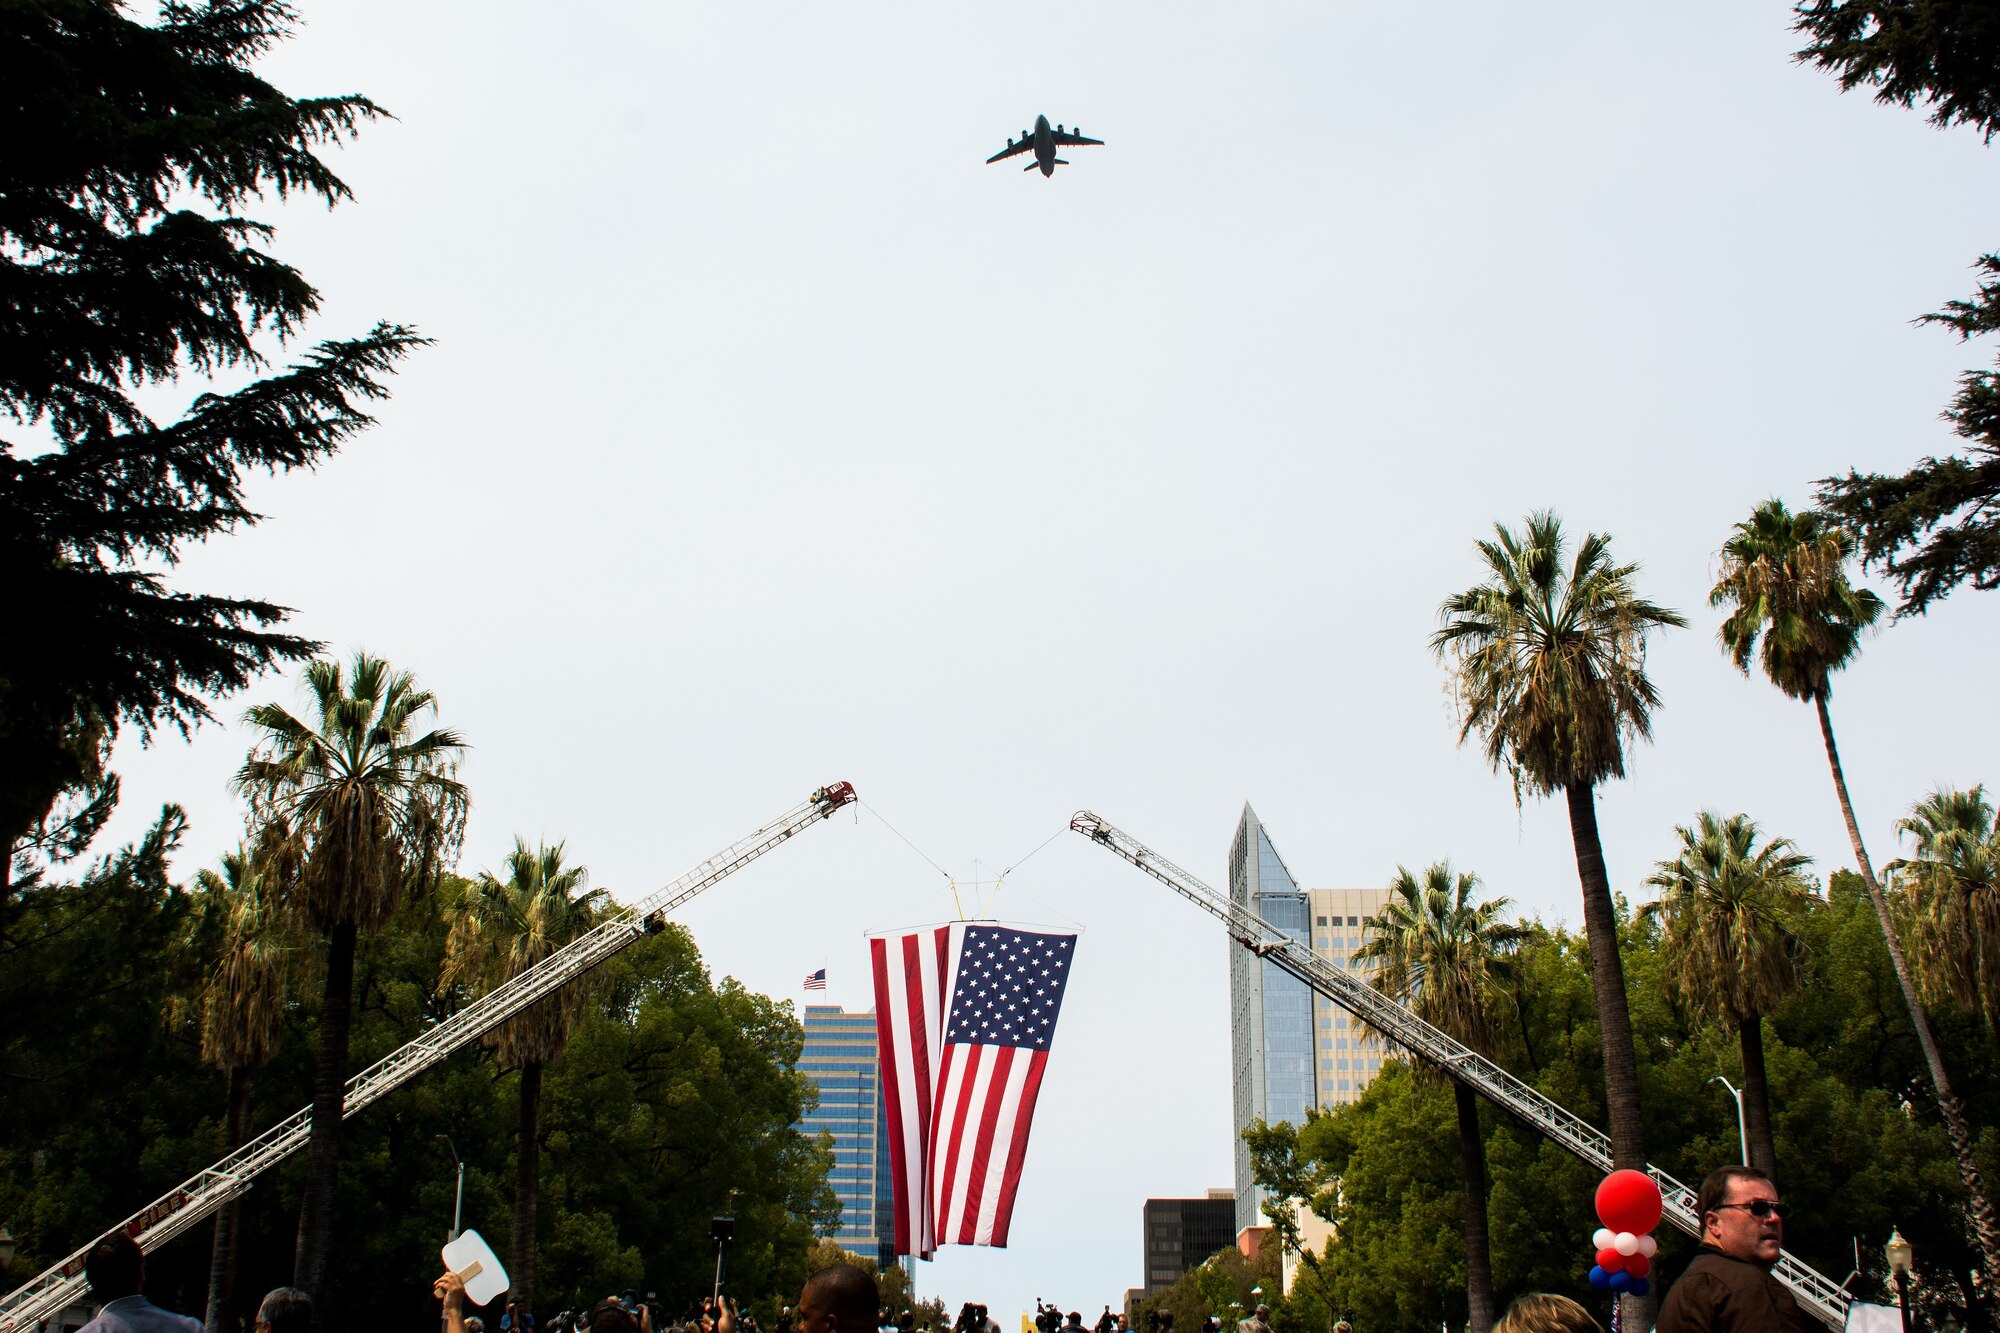 A C-17 Globemaster III from Travis Air Force Base, California, performs a flyover above the state capitol building in downtown Sacramento, California, during the Sacramento Hometown Heroes Parade and festivities, Sept. 11, 2015. Hundreds of people lined the streets during the parade to welcome home and honor Airman 1st Class Spencer Stone, Anthony Sadler and Alek Skarlatos. The trio of friends are responsible for thwarting a terrorist attack aboard a train headed toward Paris Aug. 21. (U.S. Air Force photo/Senior Airman Charles Rivezzo)